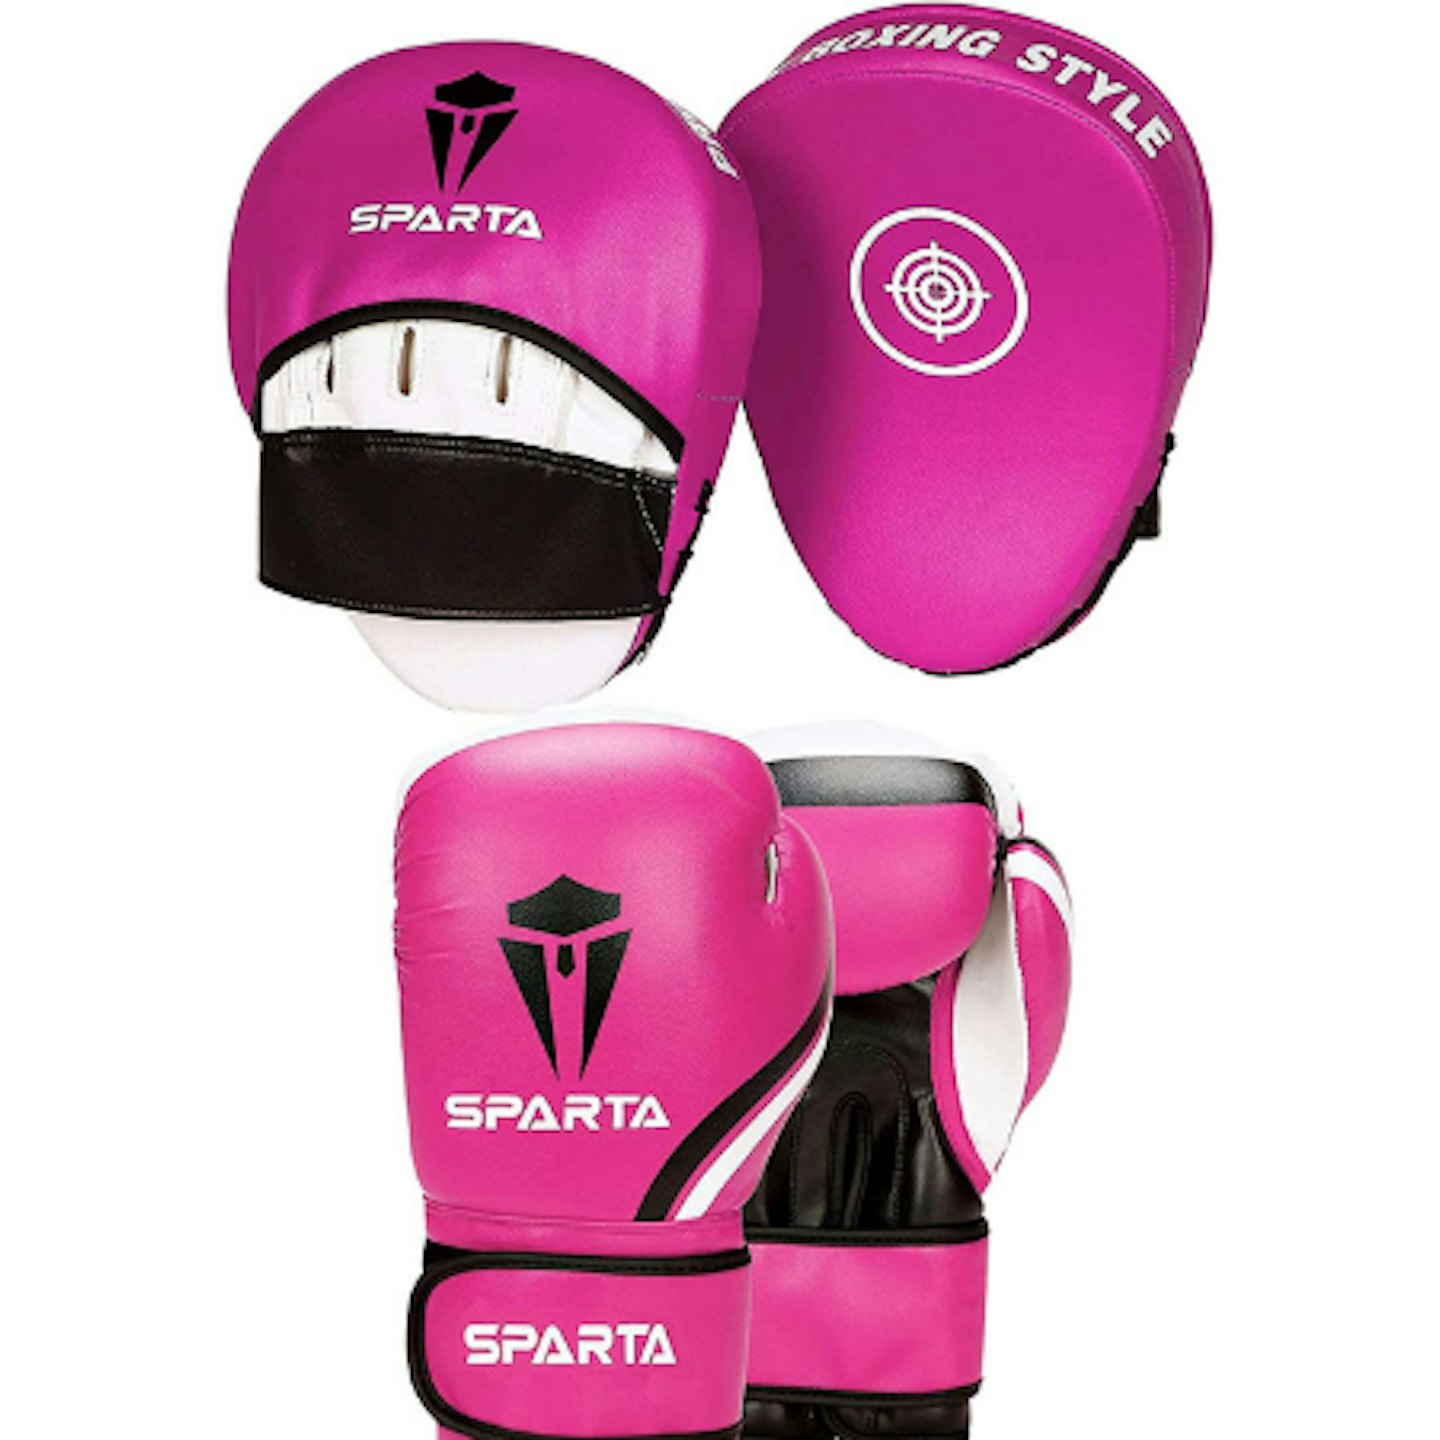 Boxing gloves and pads set